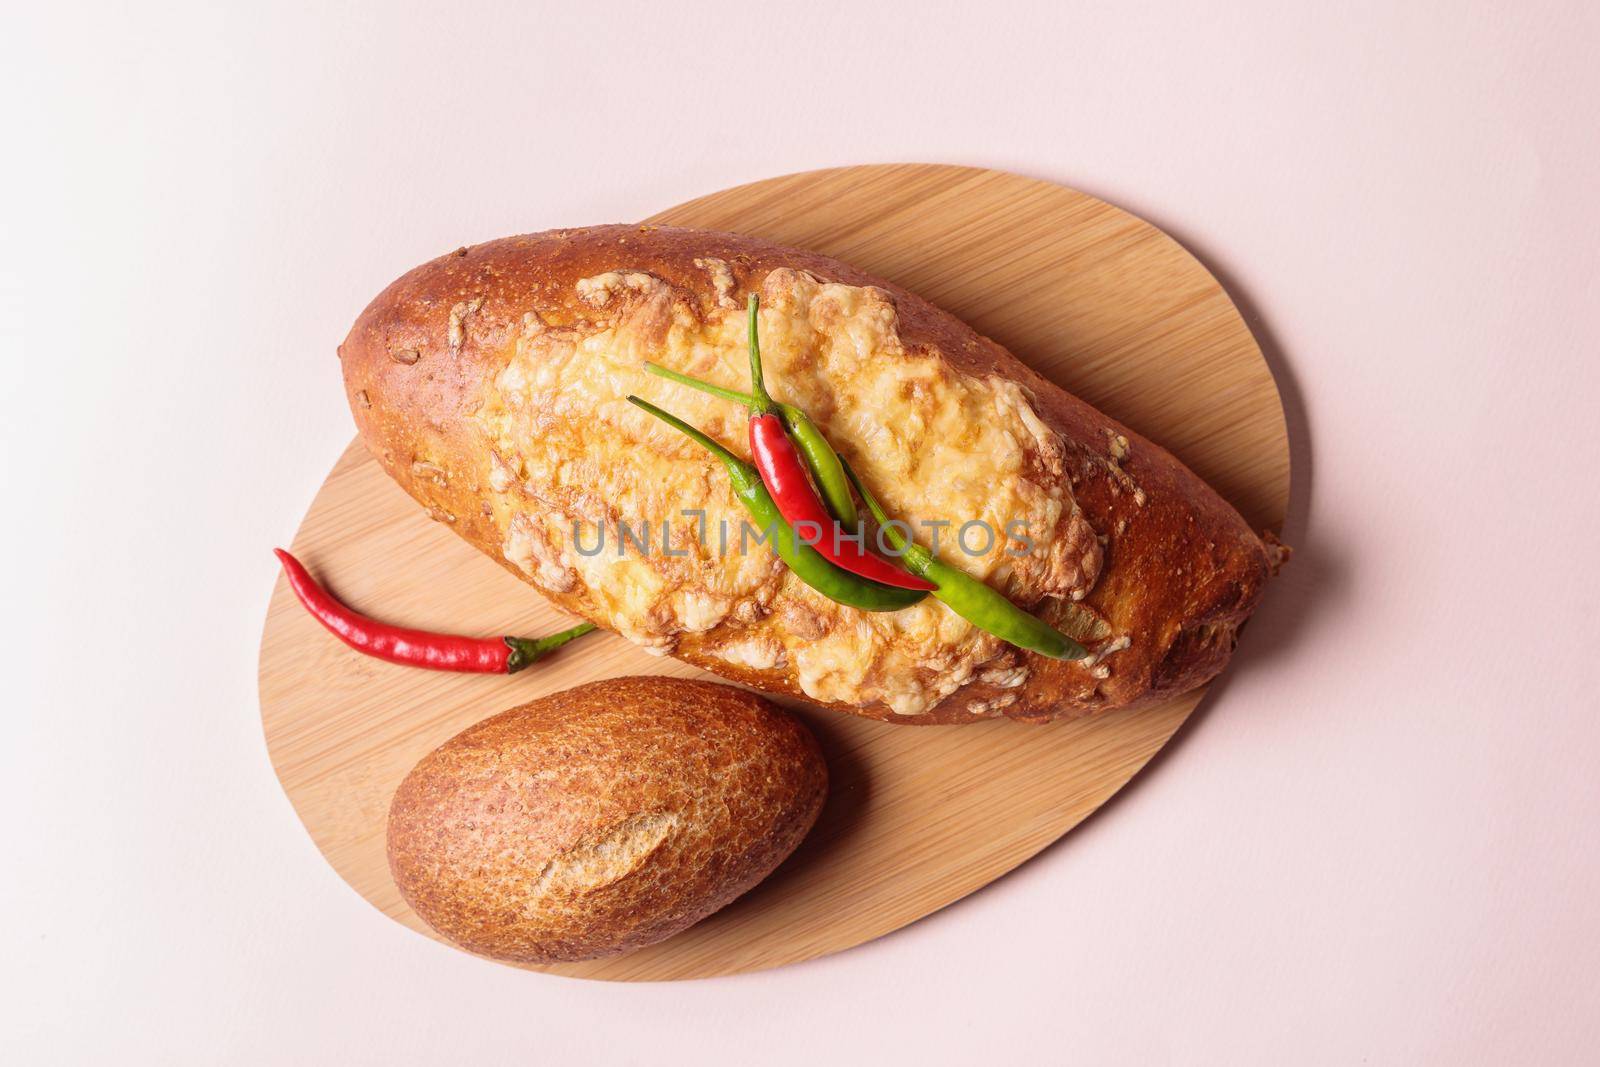 Fresh bread on a cutting board with red and green chili peppers. Close-up